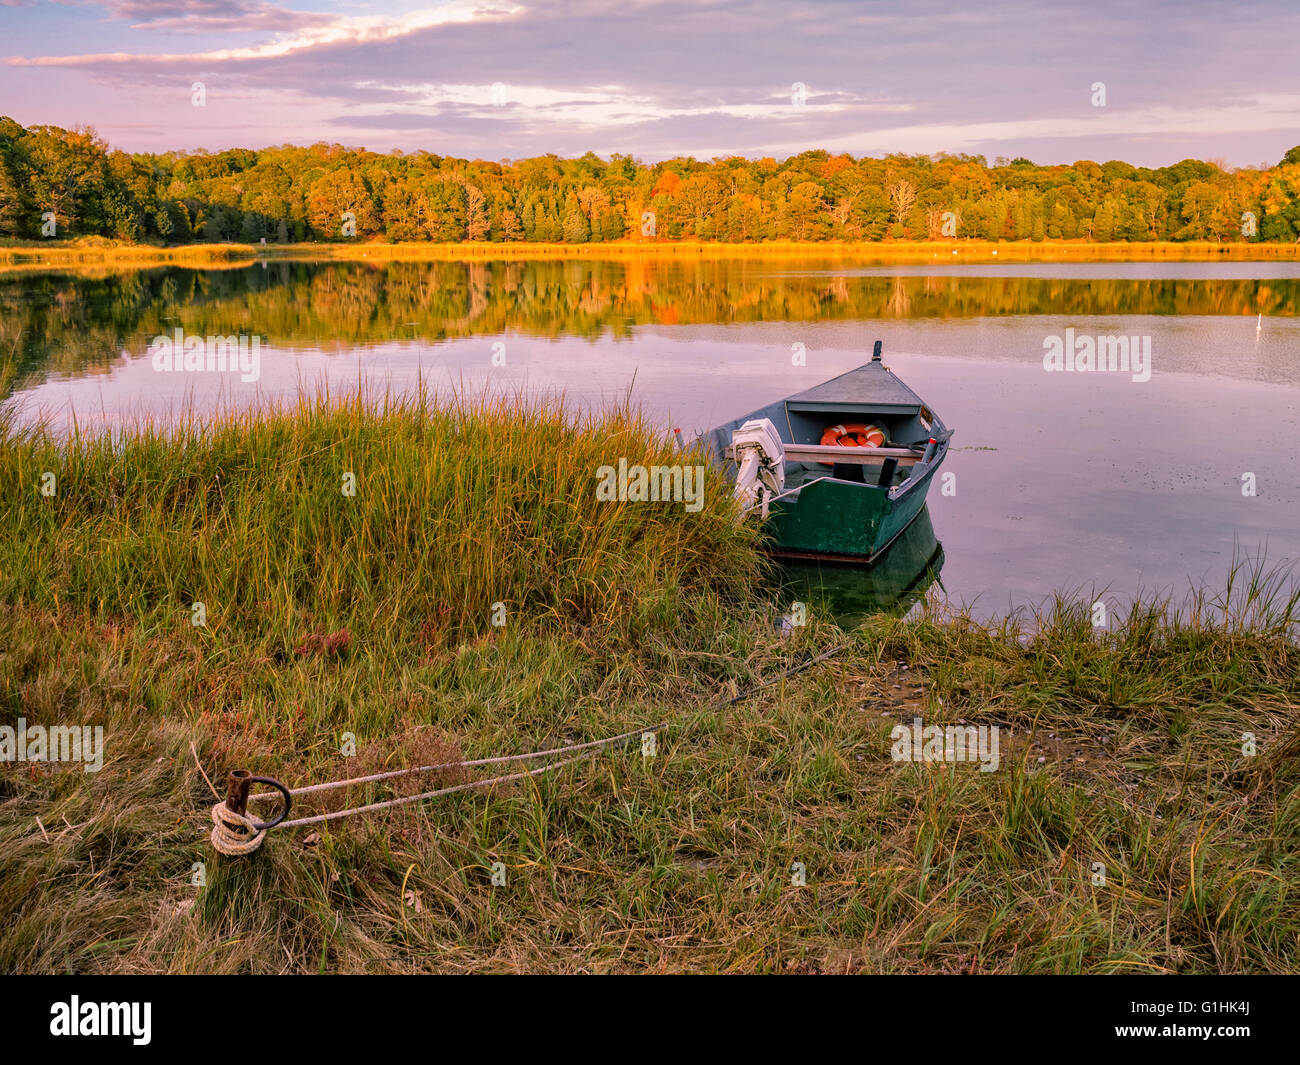 Salt Pond, Eastham MA Cape Cod, Massachusetts, USA solitary wooden boat moored fall color autumn colours reflections in water peaceful scenic Stock Photo